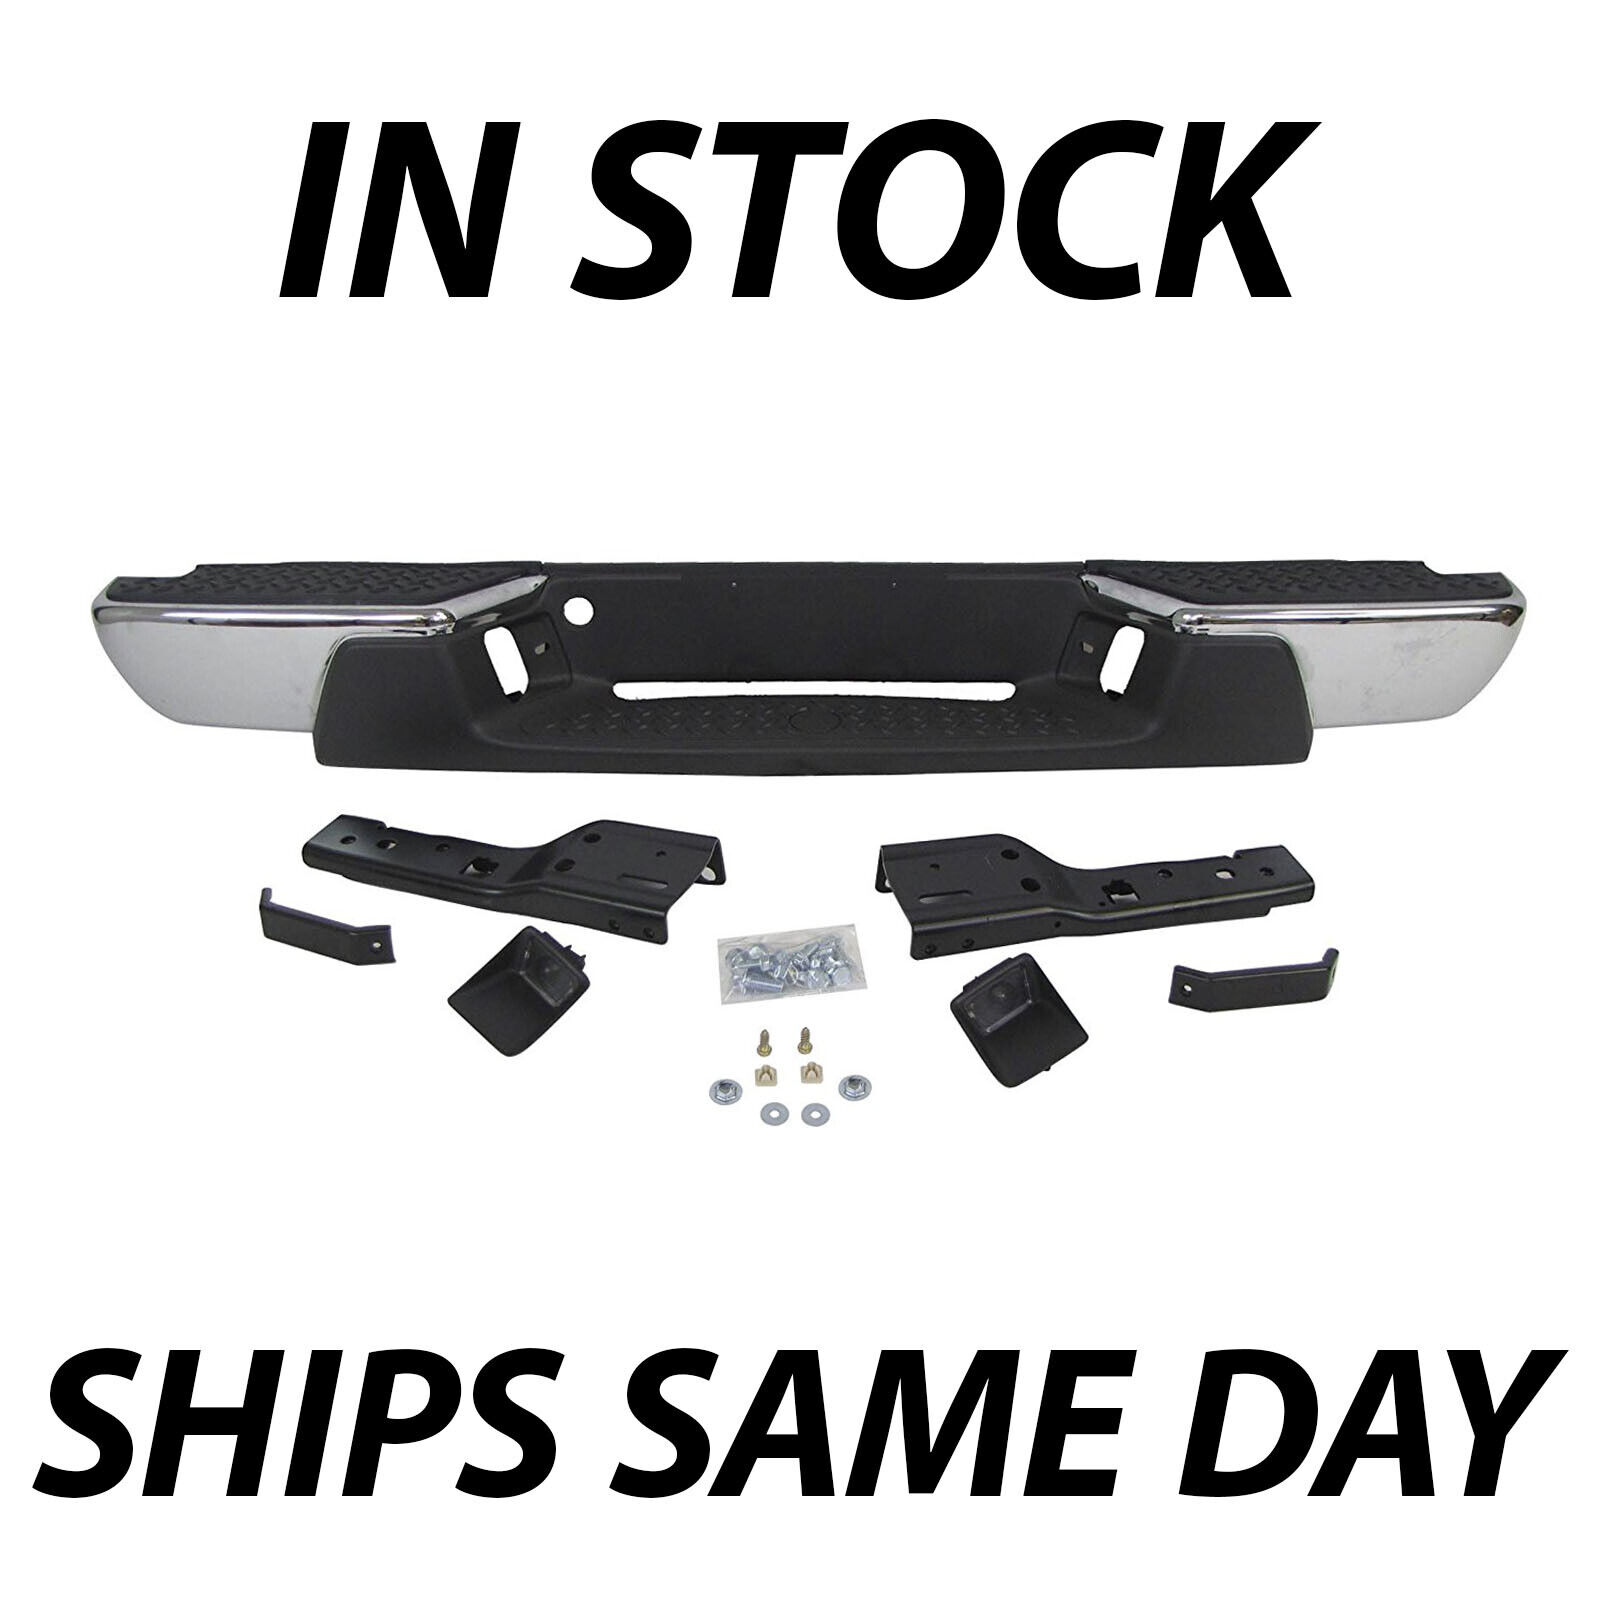 NEW Chrome Steel Rear Bumper Assembly for 2008-2012 Chevy Colorado & GMC Canyon